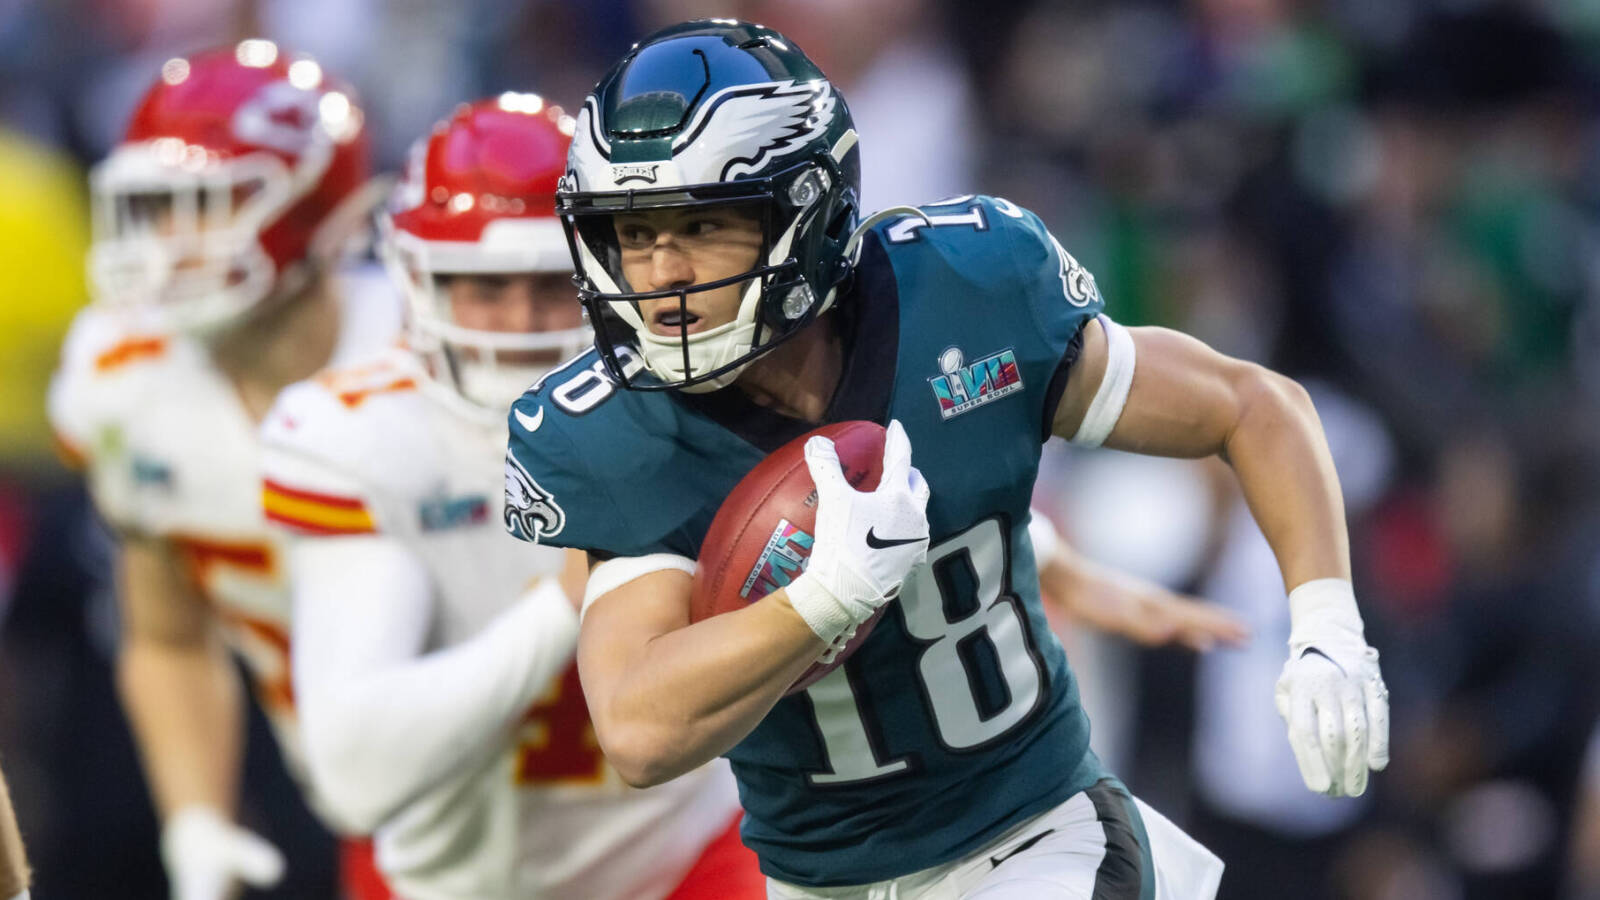 Punt returner shares controversial comments on Eagles' collapse